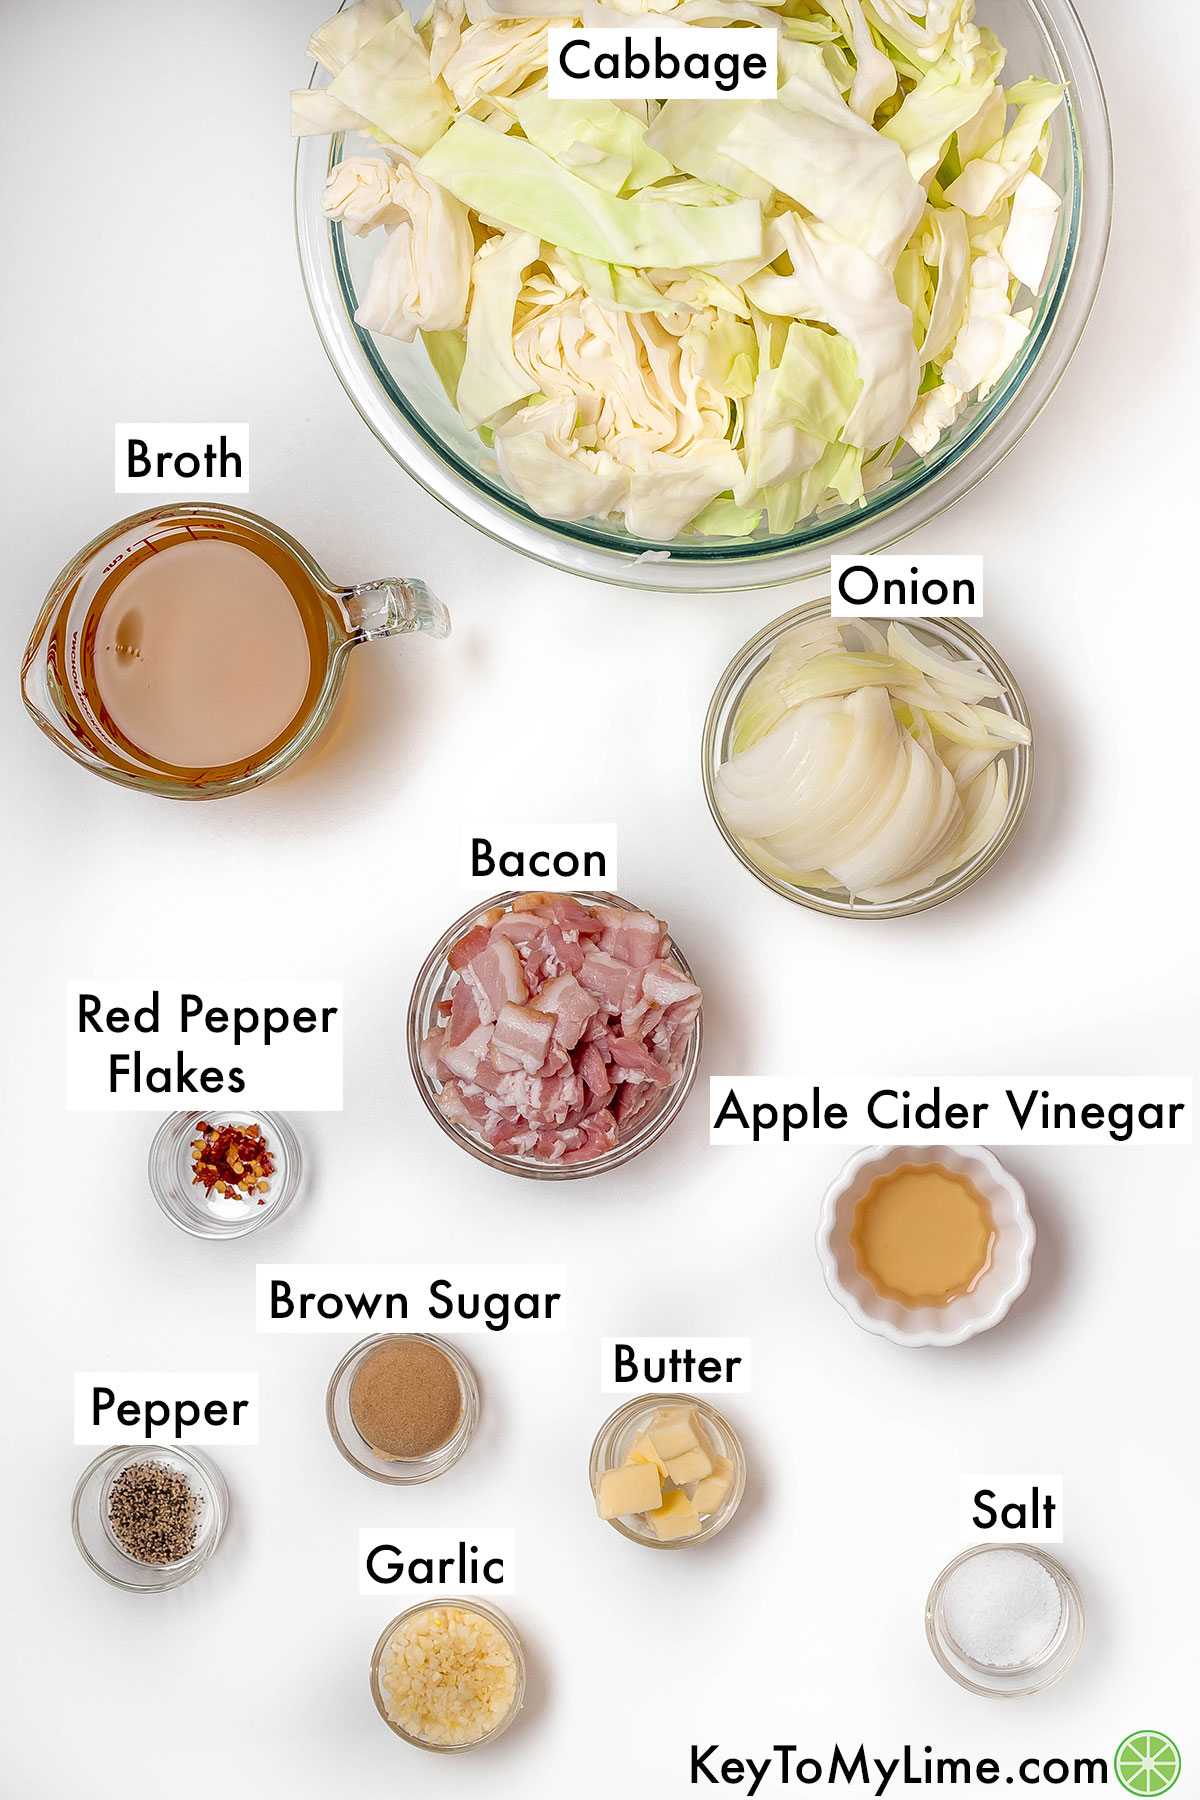 The labeled ingredients for crockpot cabbage.